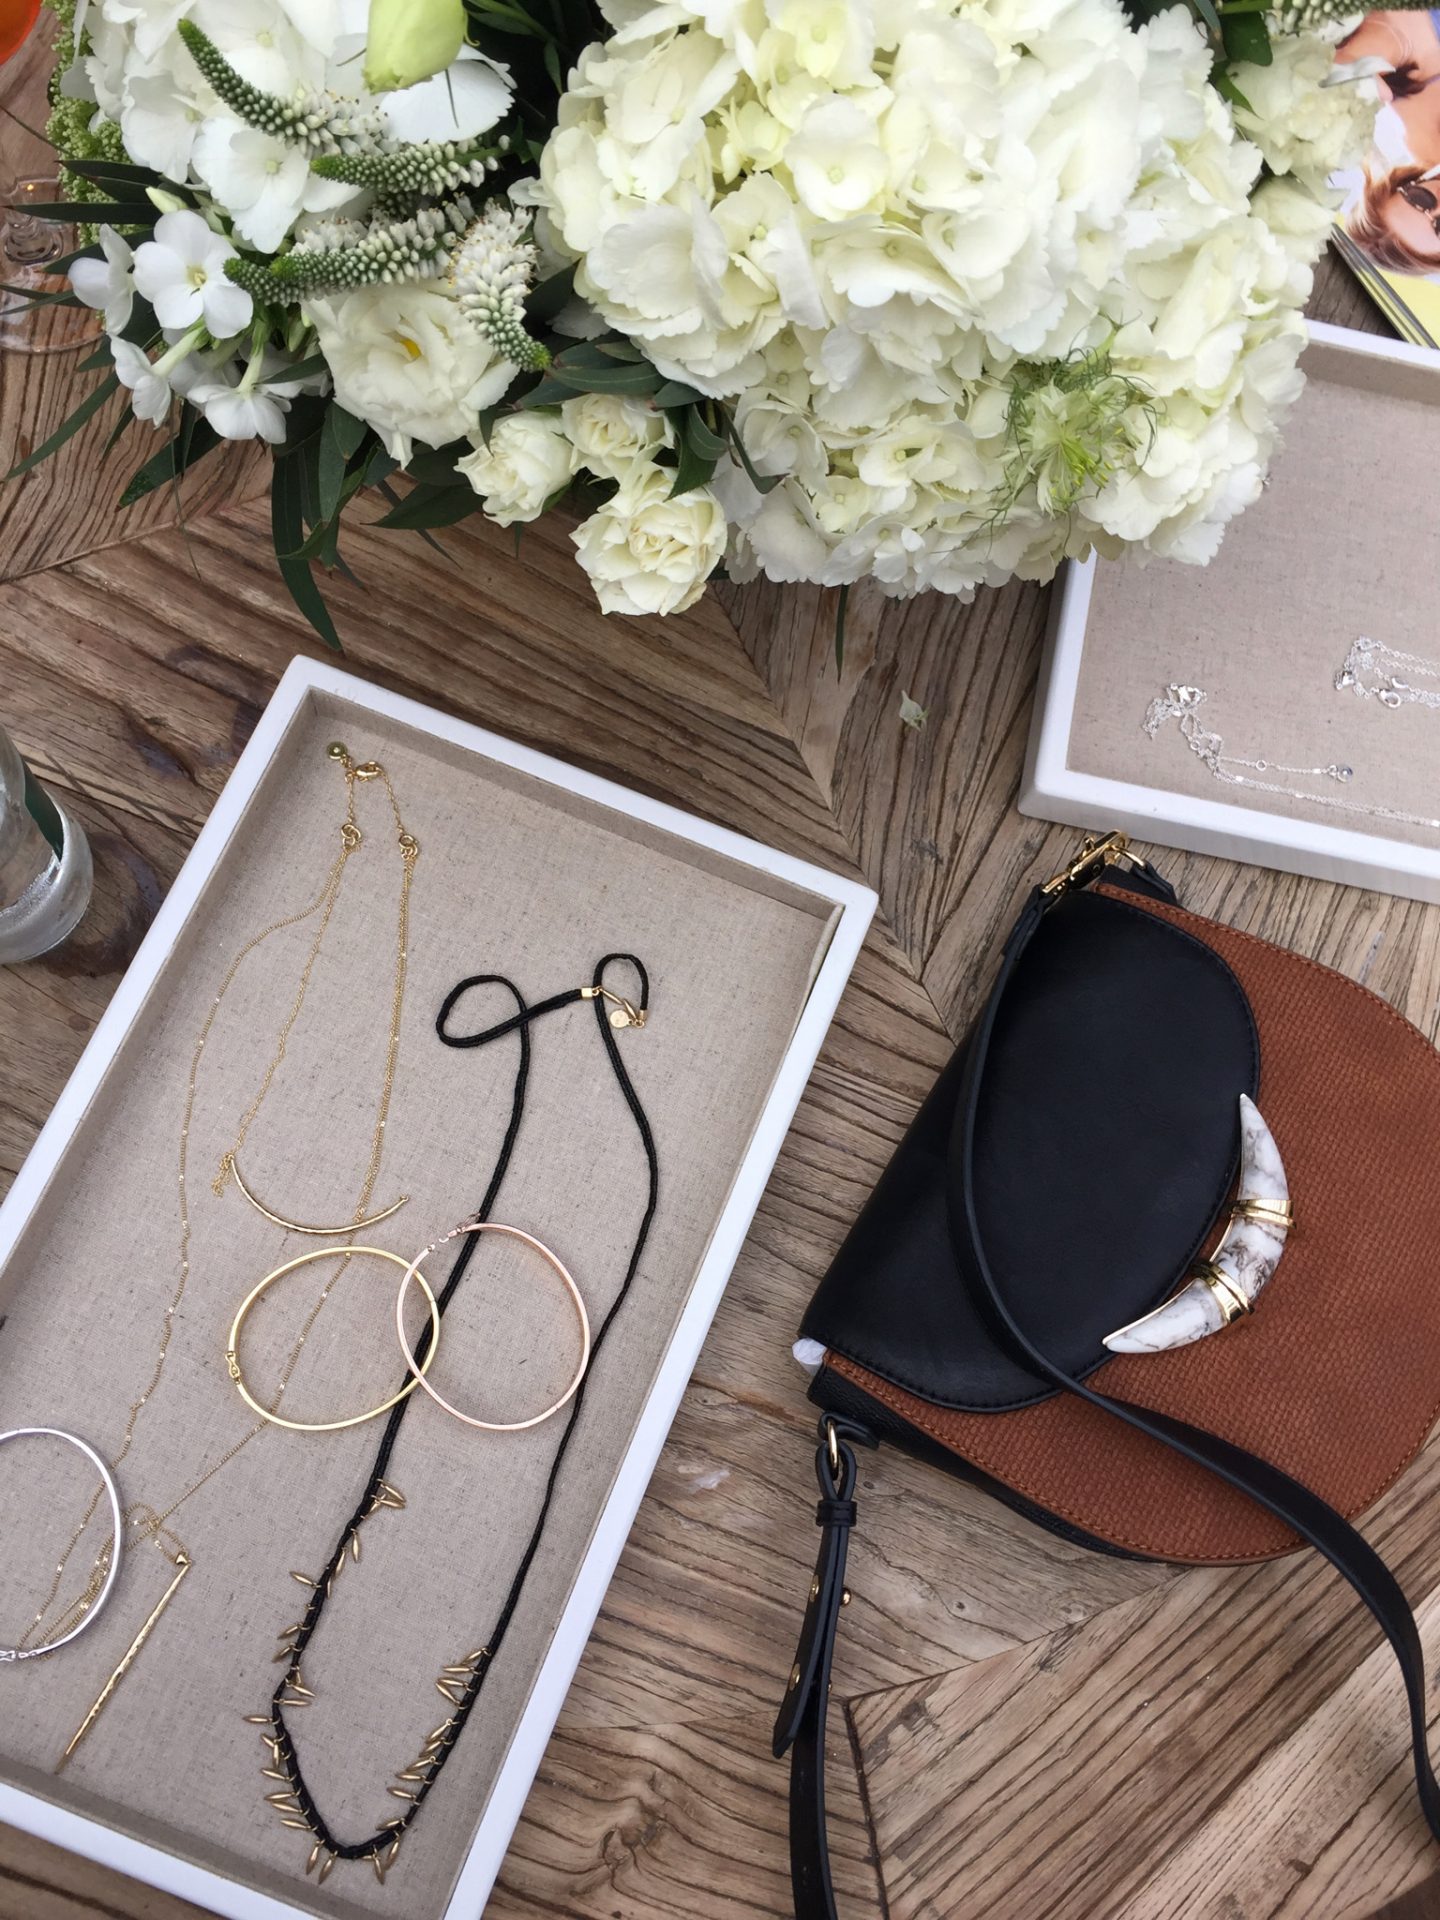 Look No Further – Here Is All You Need This Summer To Accessories Your Outfits Thanks To Stella & Dot